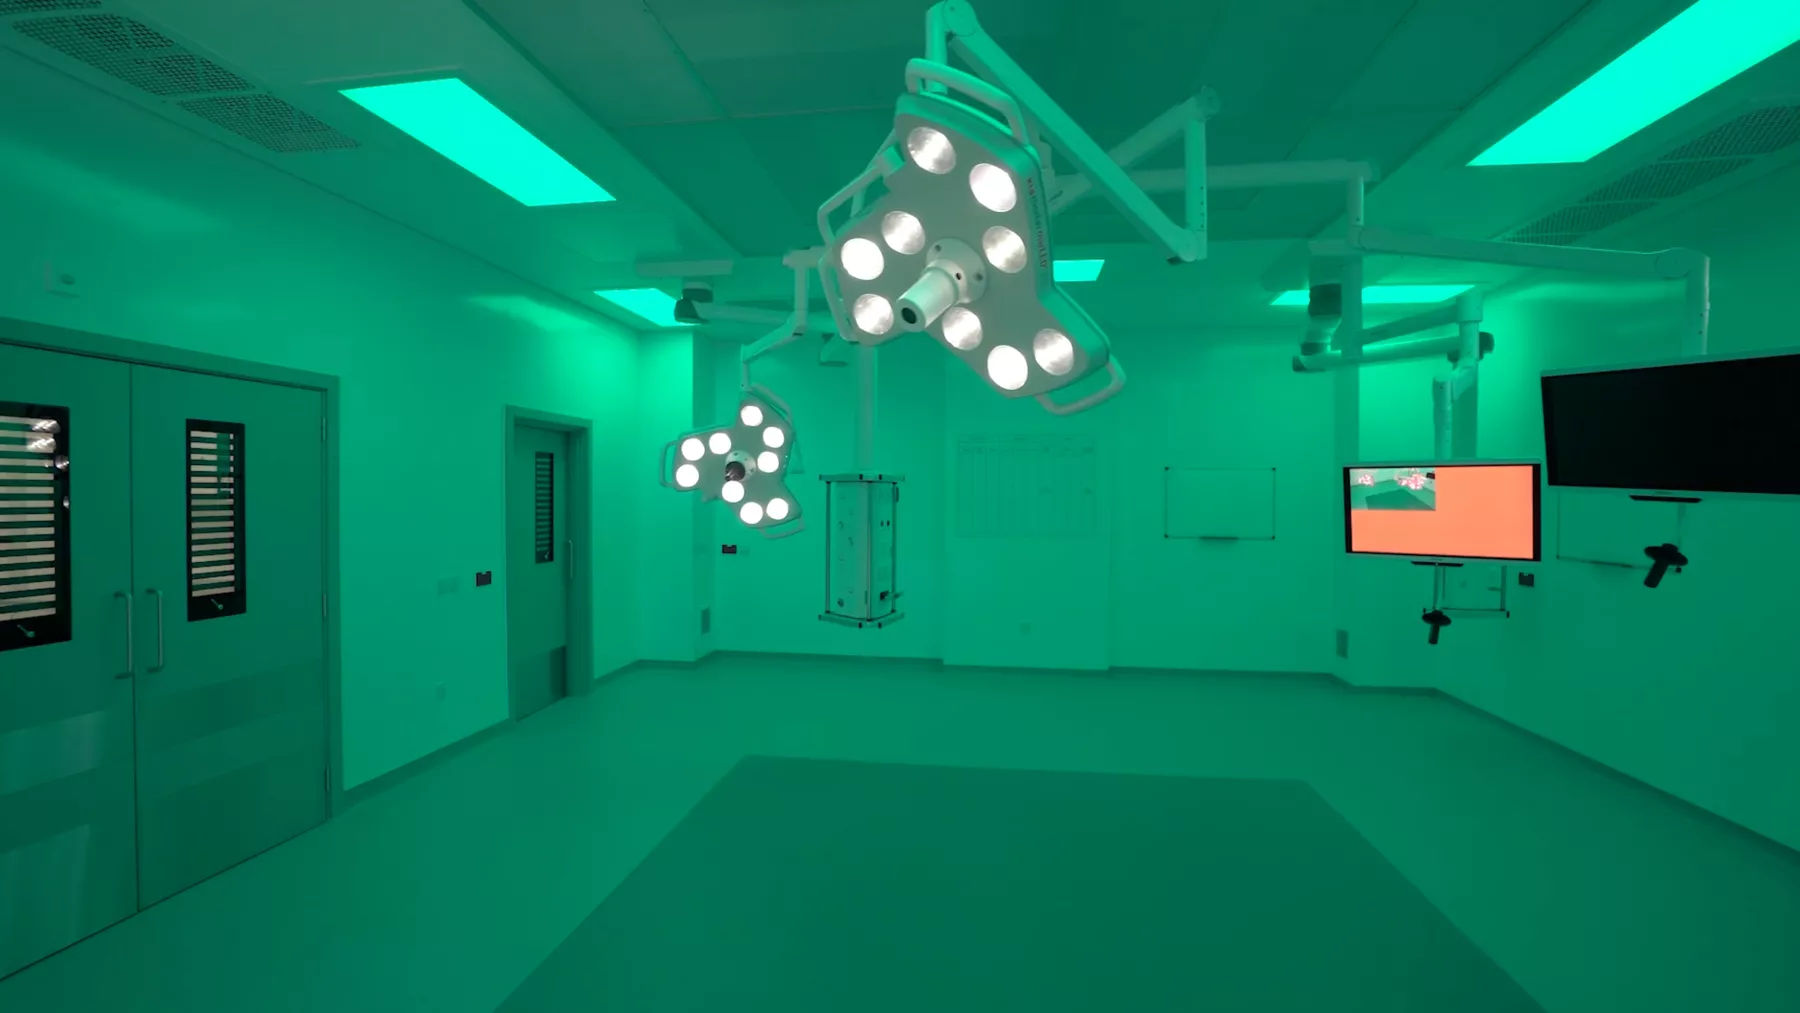 Inside a new operating theatre at the National Treatment Centre - Fife Orthopaedics, Kirkcaldy, Scotland. Theatre lighting and screens. The theatre is flooded with green light. There is no operating table or other equipment.